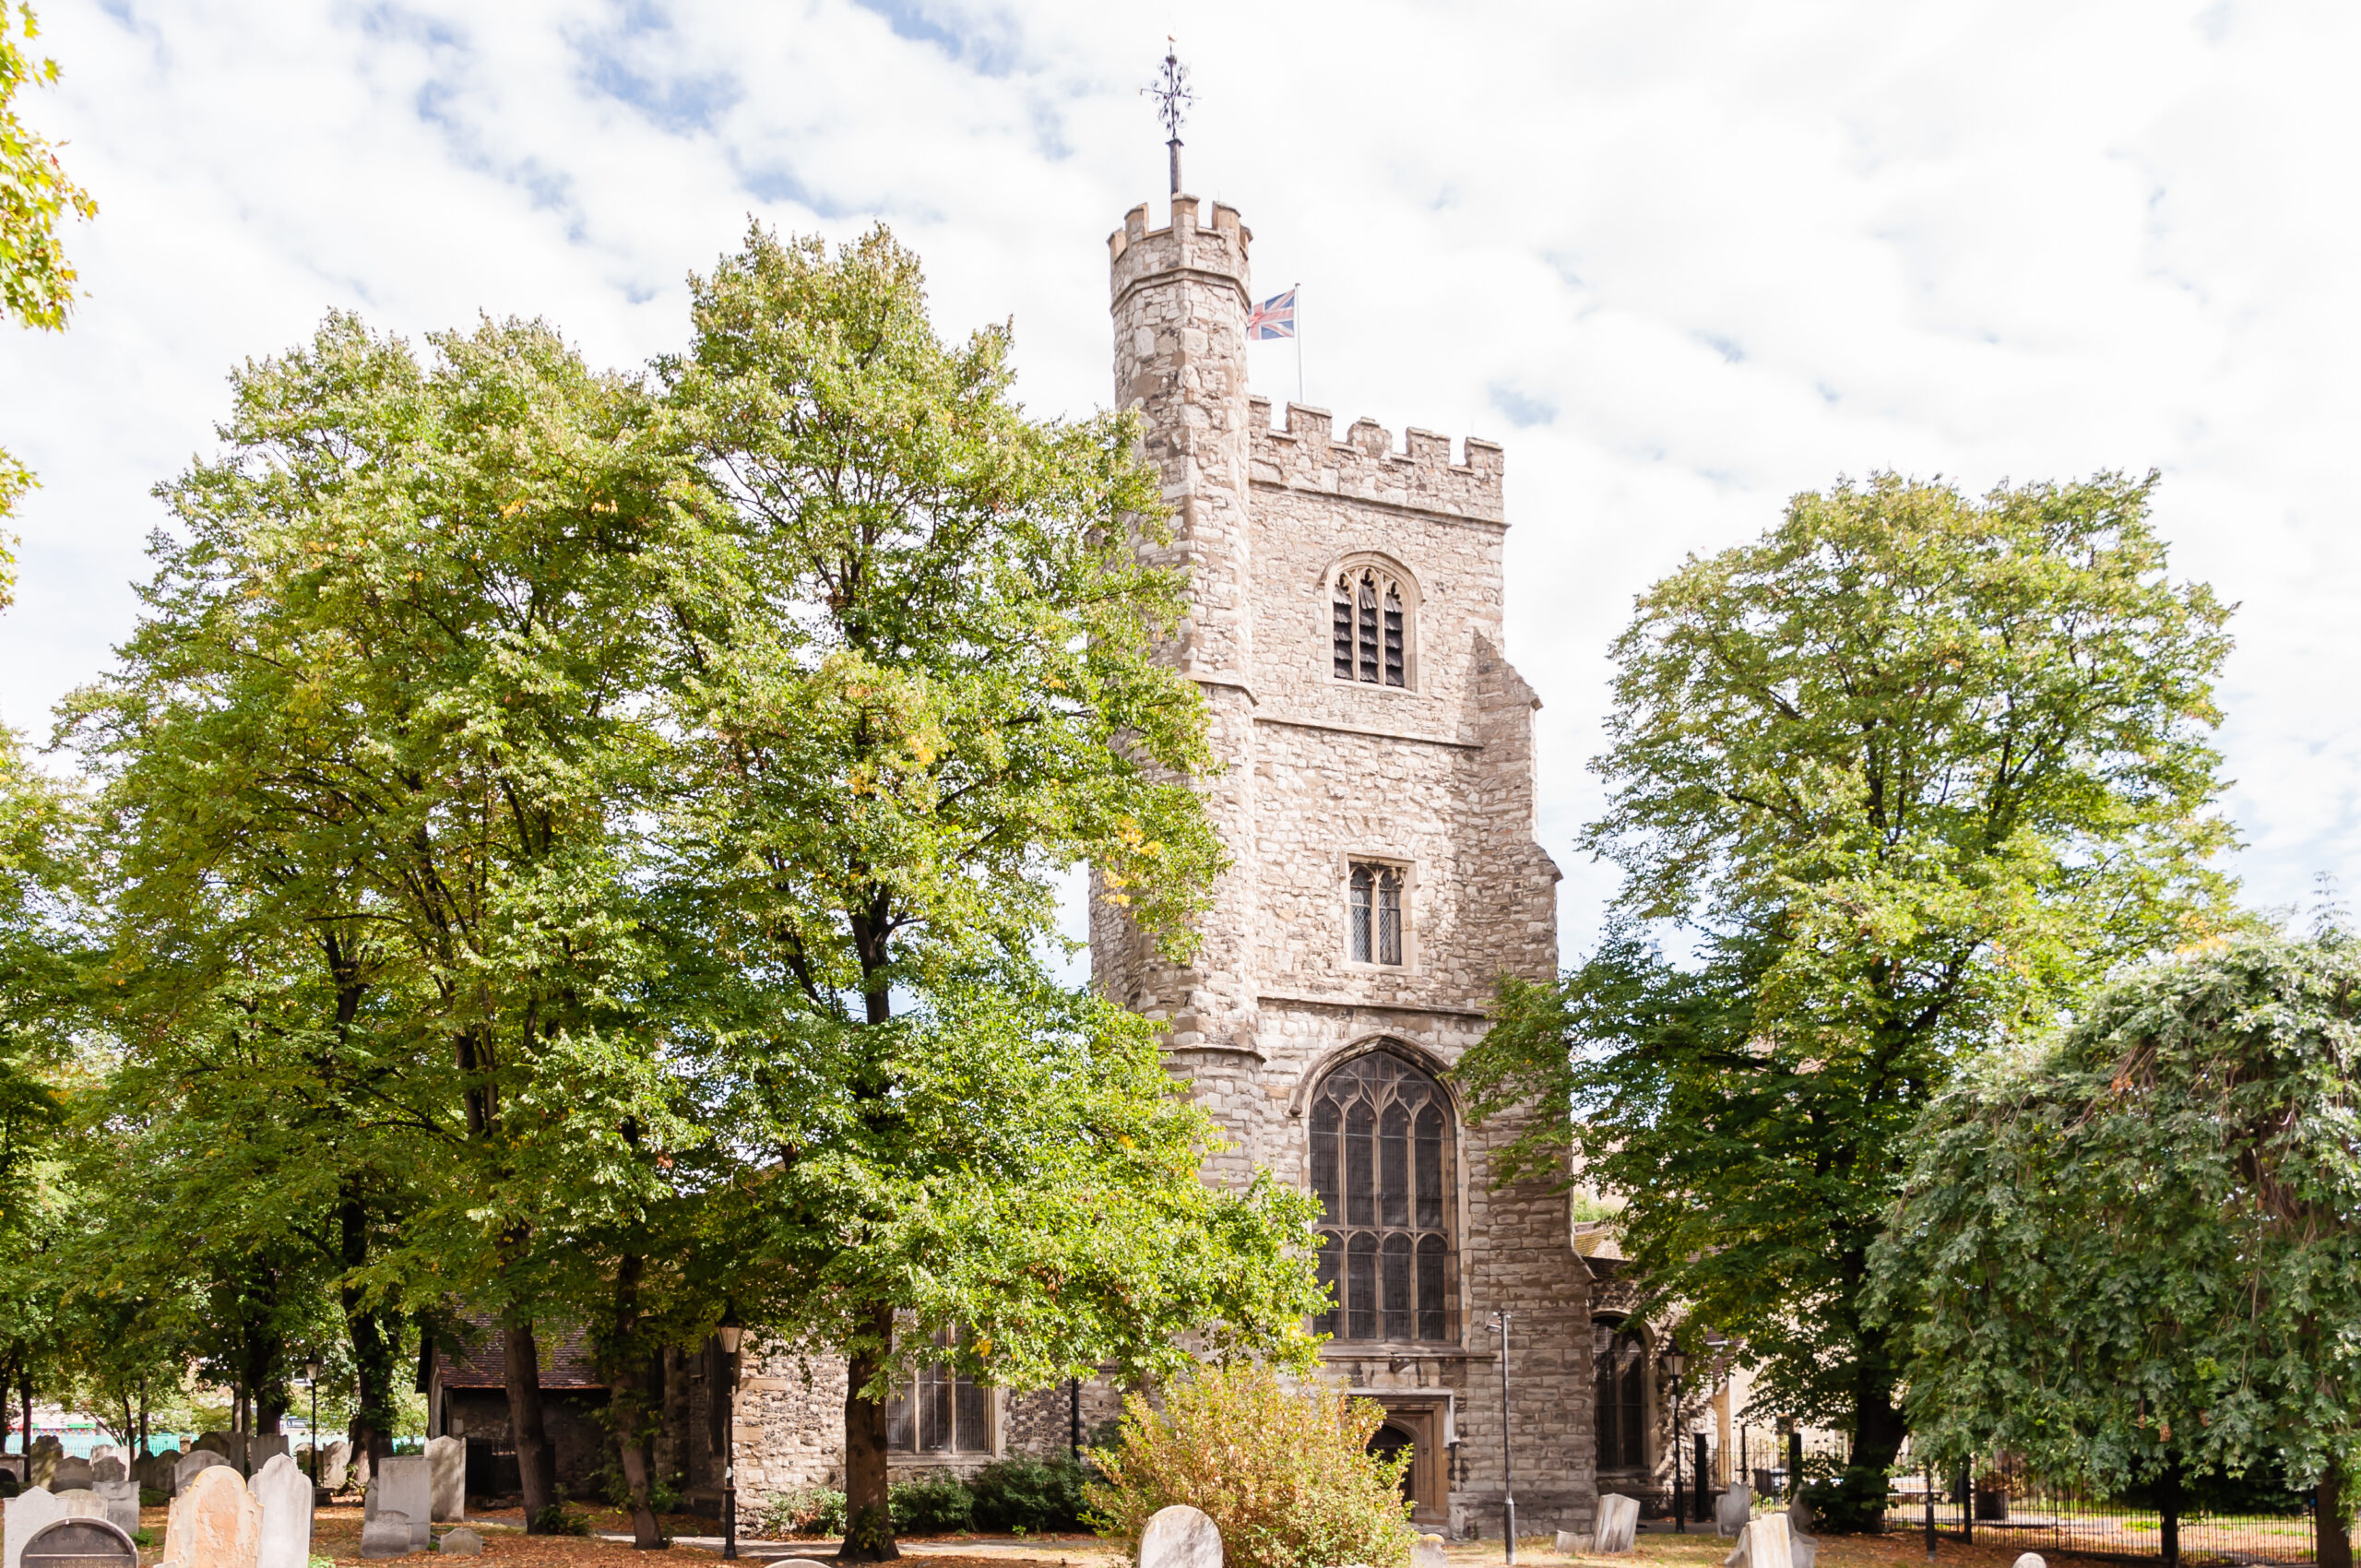 St Margaret’s Parish Church, Barking is a wonderful historic church. It stands on the site of Barking Abbey, one of the most ancient Christian sites in the country